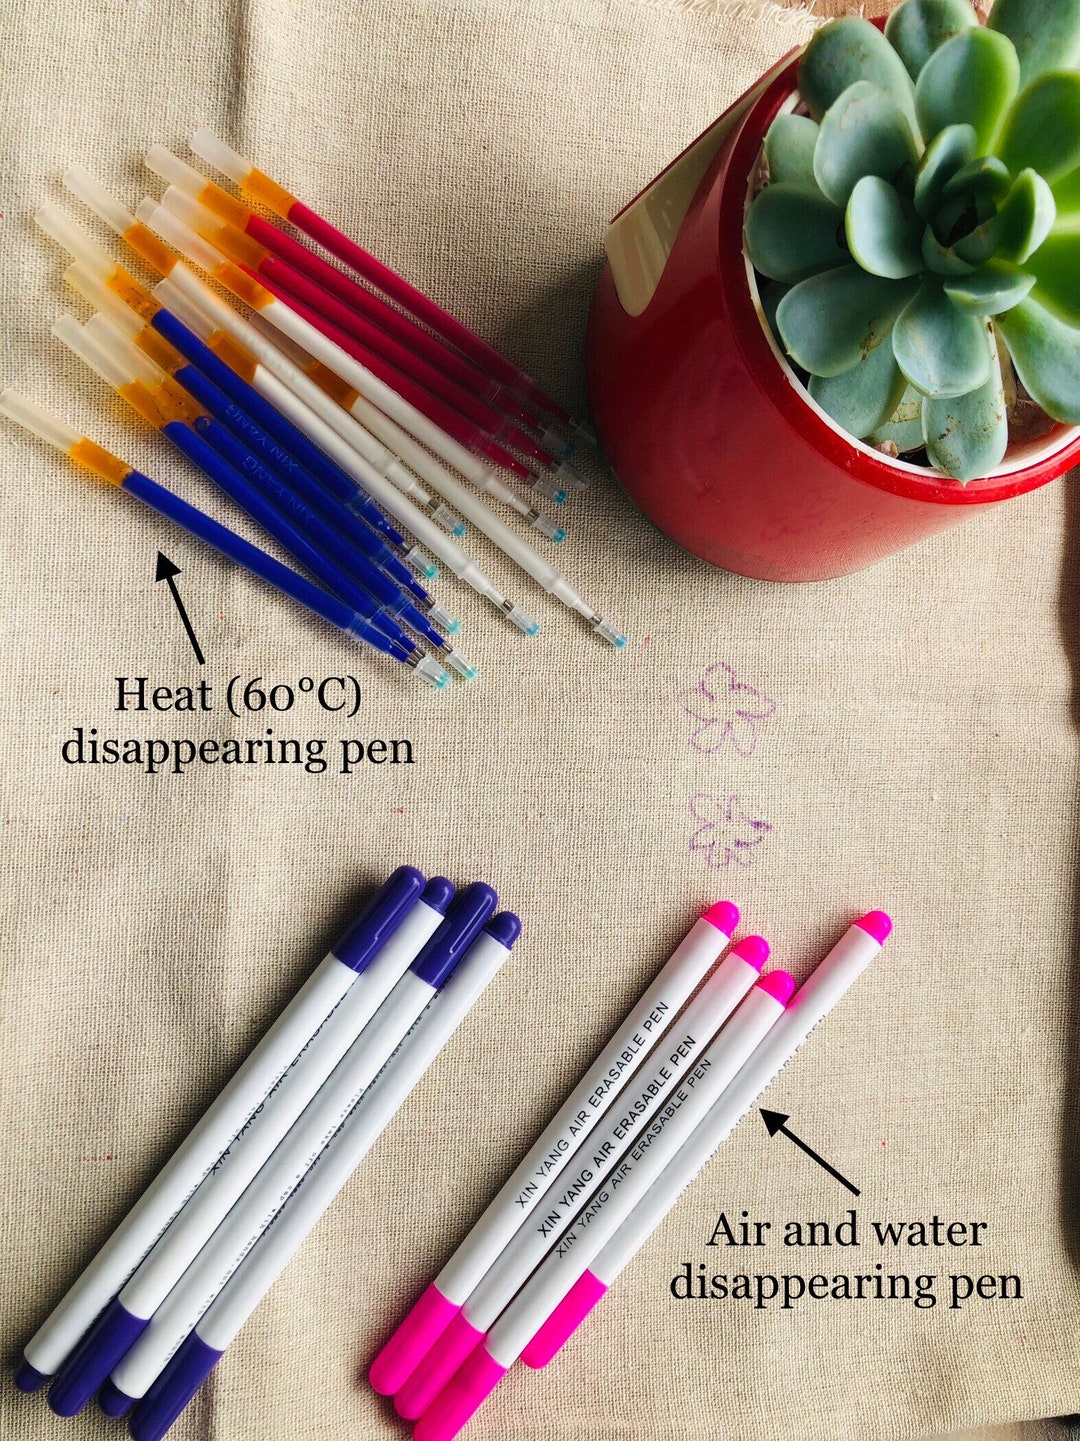 Disappearing Pens For Sewing Embroidery Pen Fabric With 10 Fabric